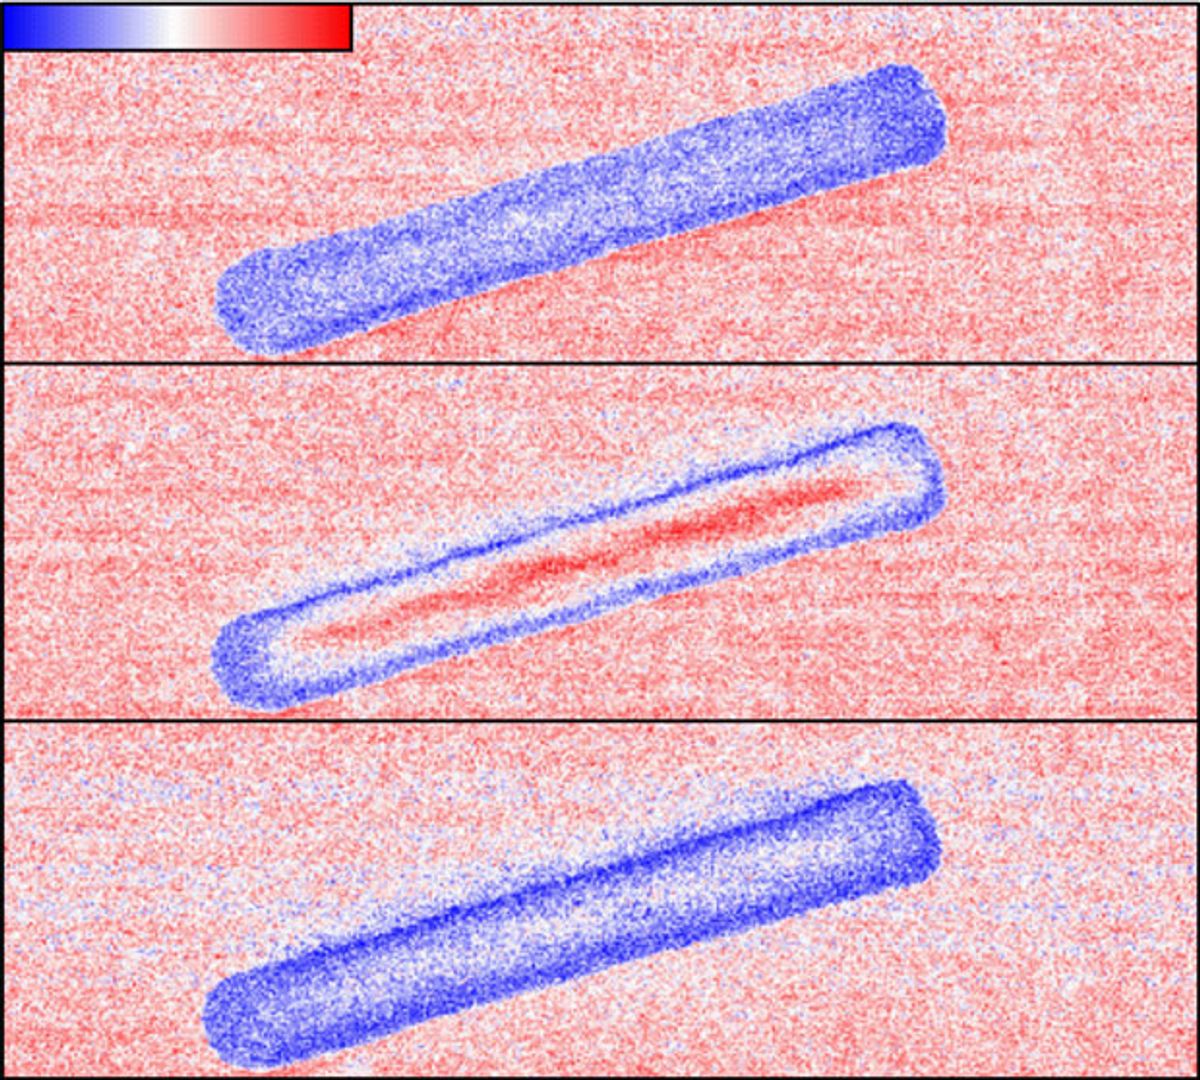 3-D Mapping of Electrons Moving on a Material's Surface